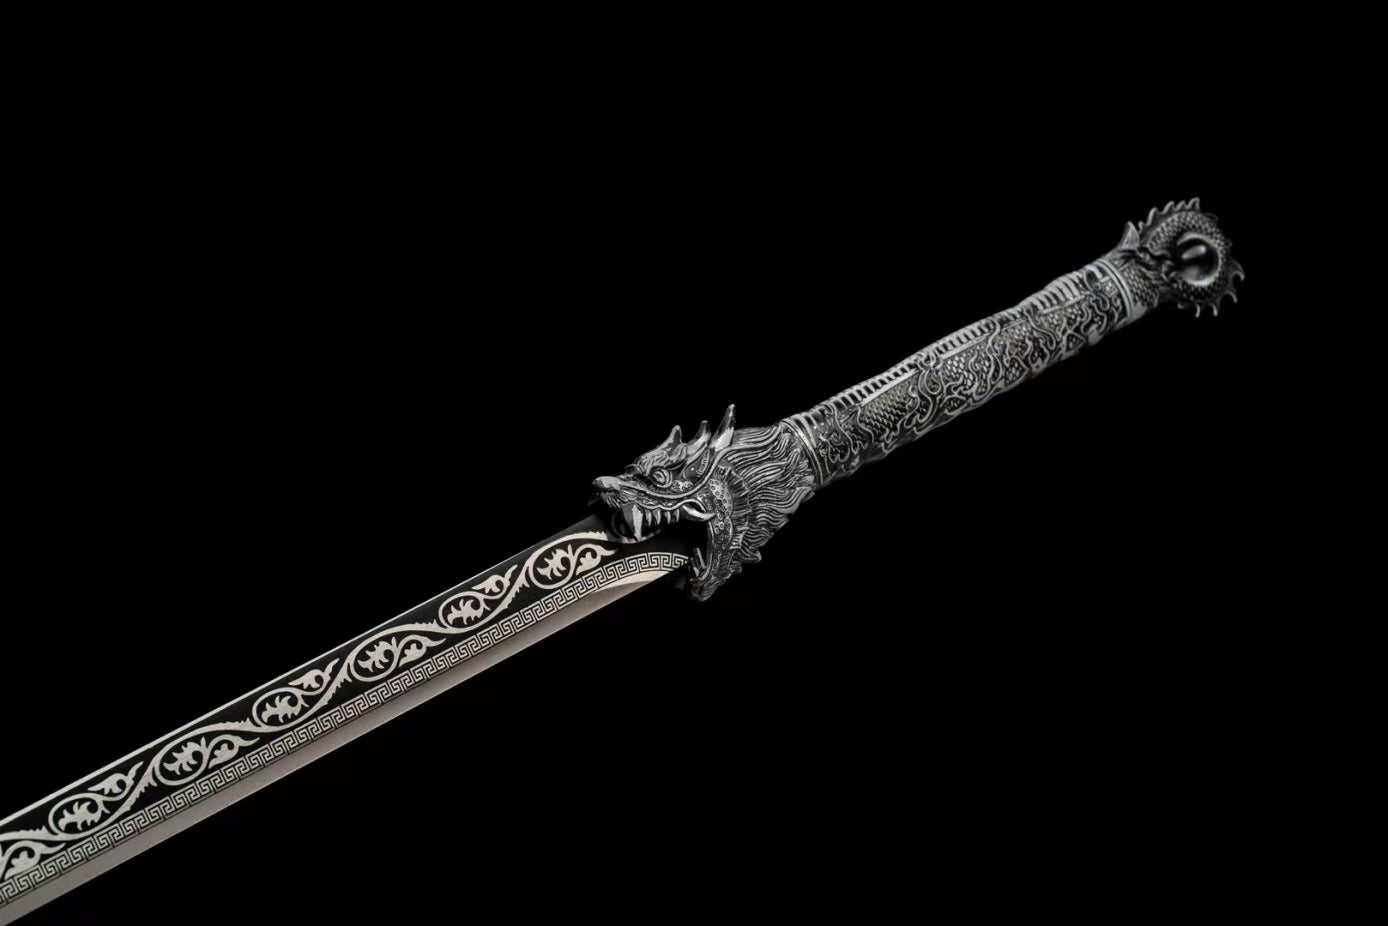 Dragon Tang dao Tactical Swords High Hardness Blade,Alloy Fittings,Pu Scabbard,LOONGSWORD